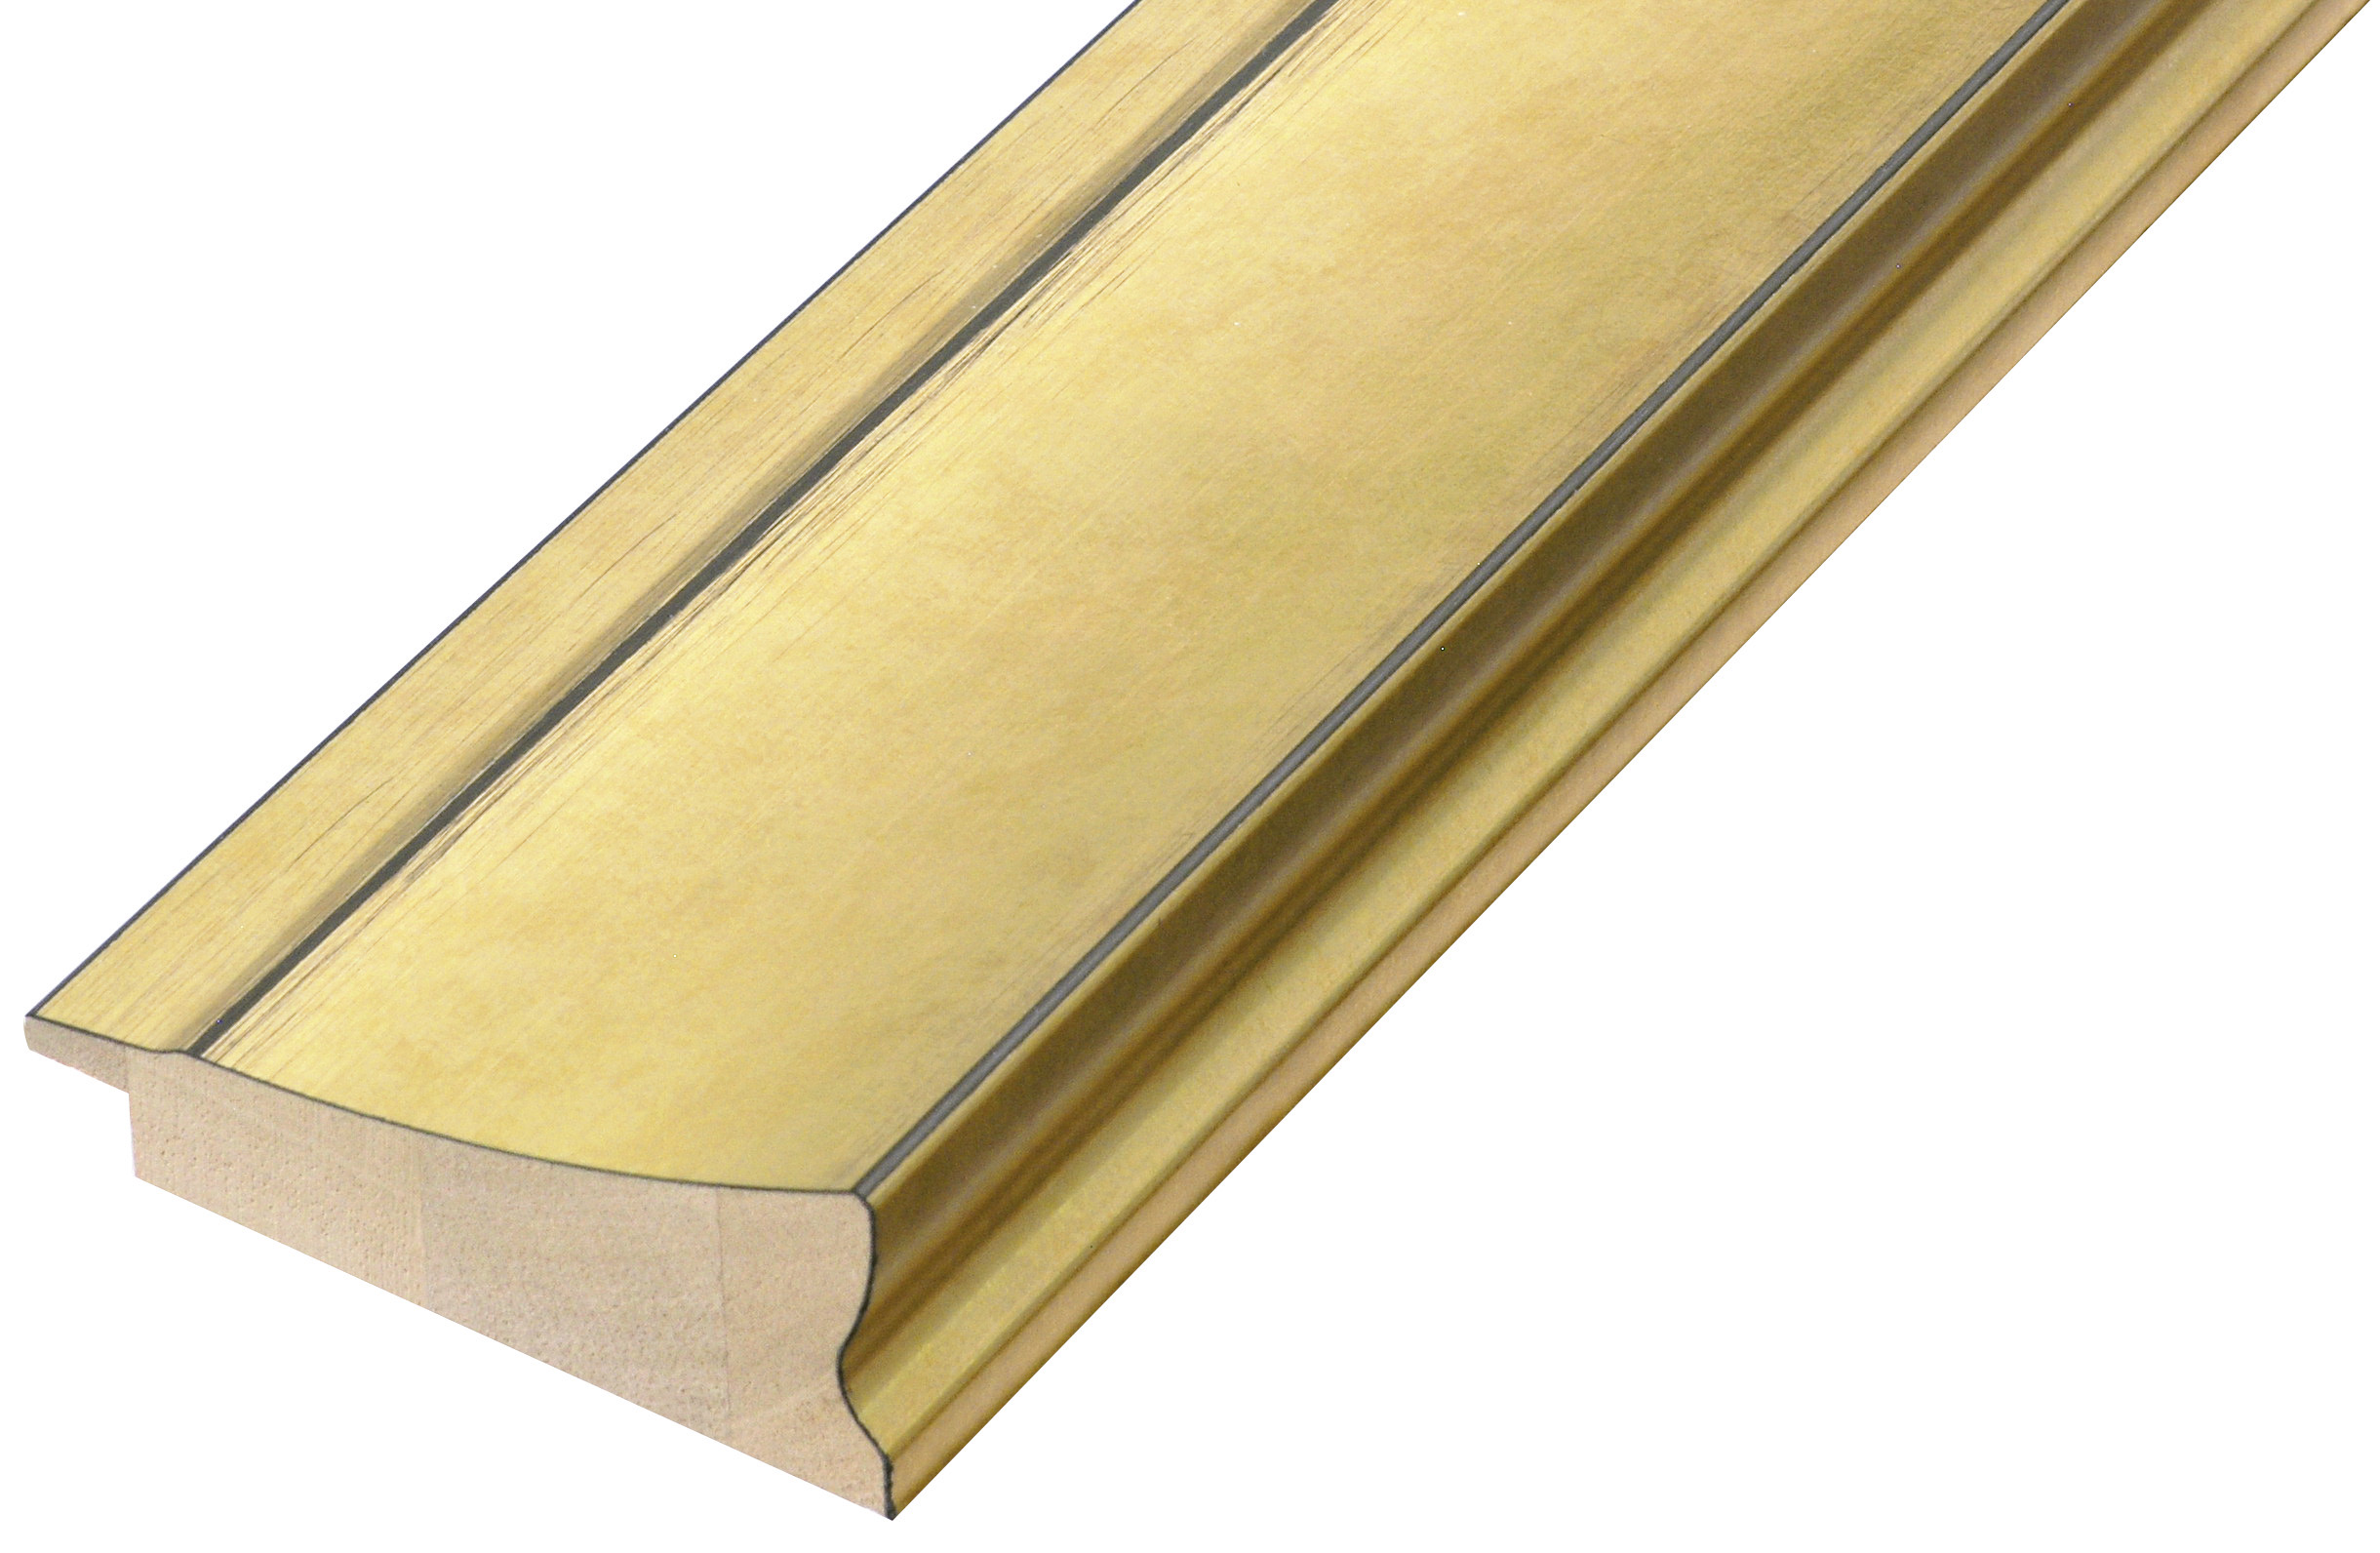 Moulding finger-jointed pine width 68mm height 29 - gold - 526ORO